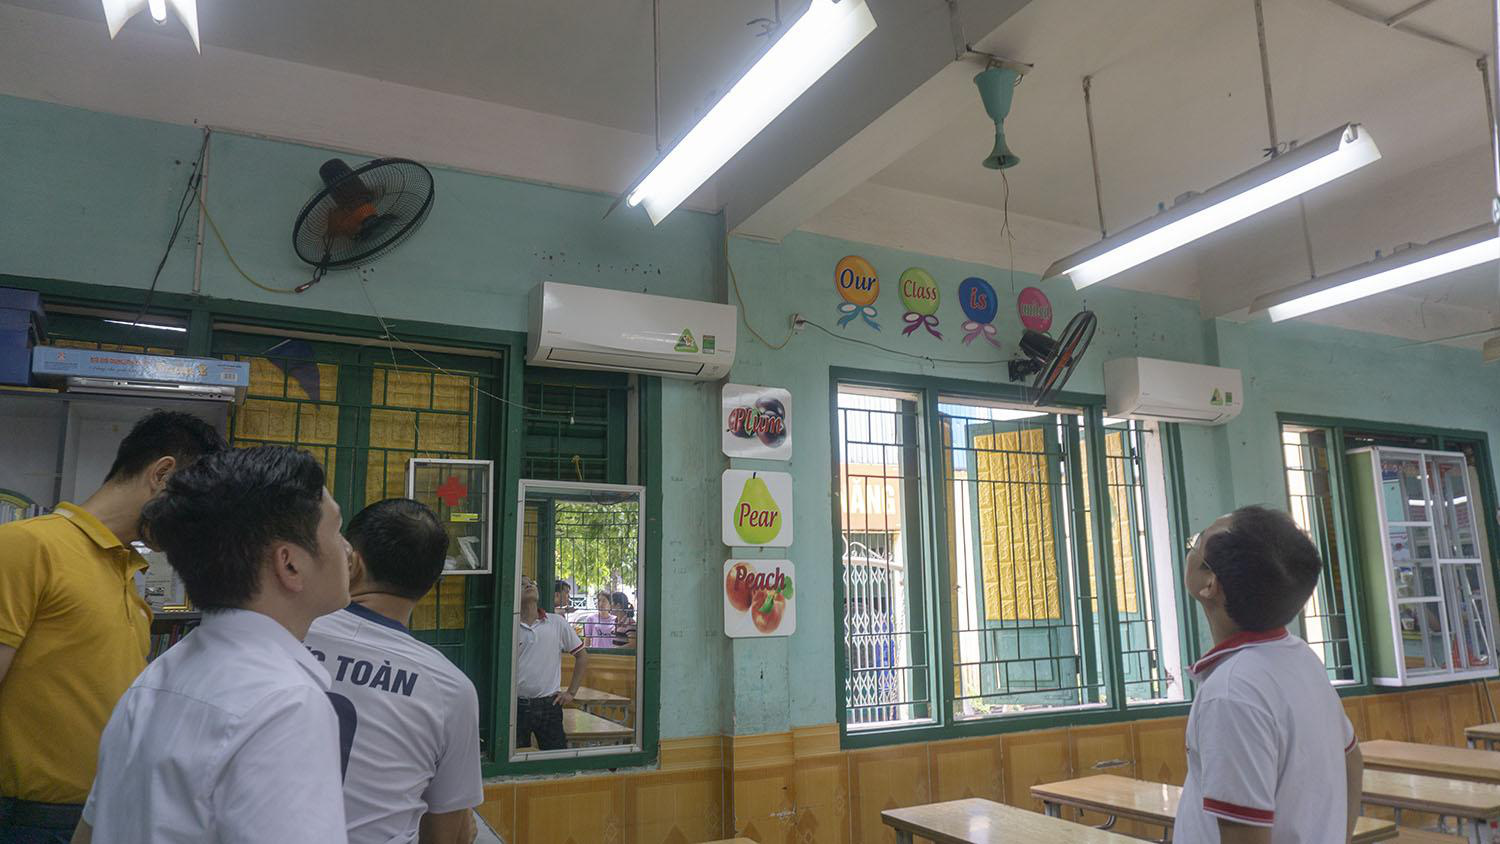 Classroom ceiling fan falls on student in northern Vietnam